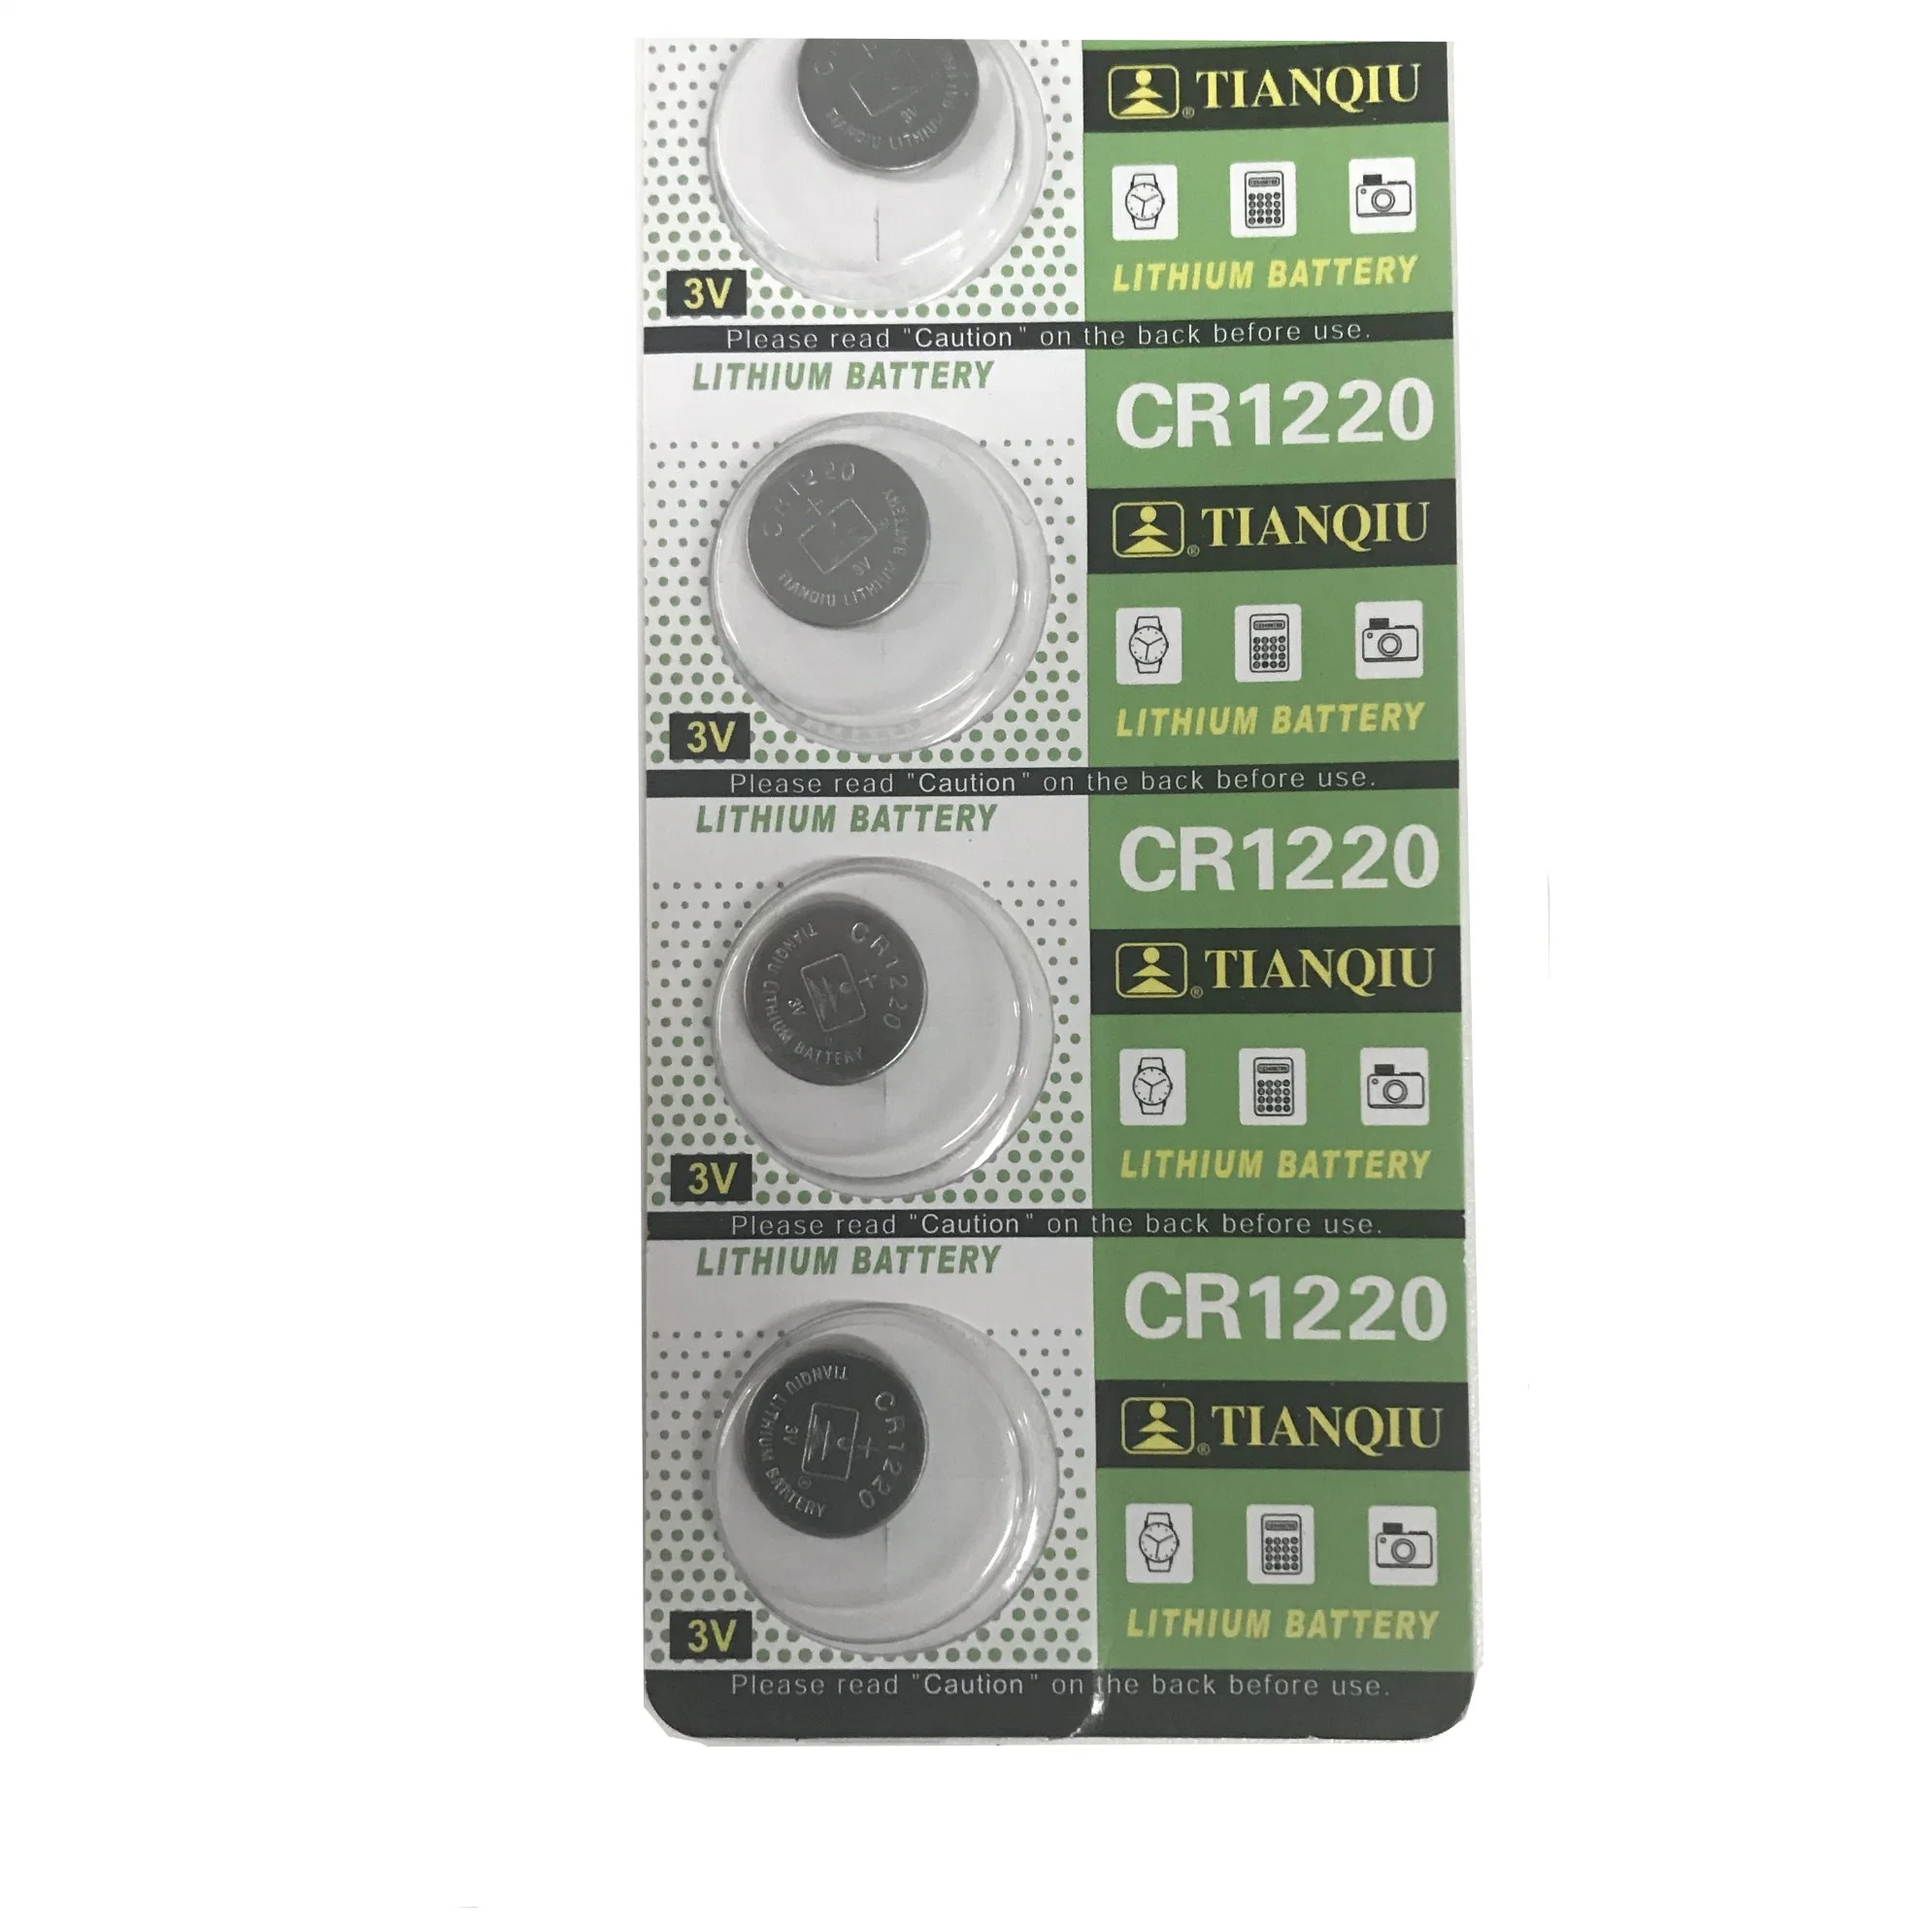 Tianqiu Cr1220 Lithium 3V Dry Battery Button Cell Cr2032 Cr2025 Cr2016 Factory